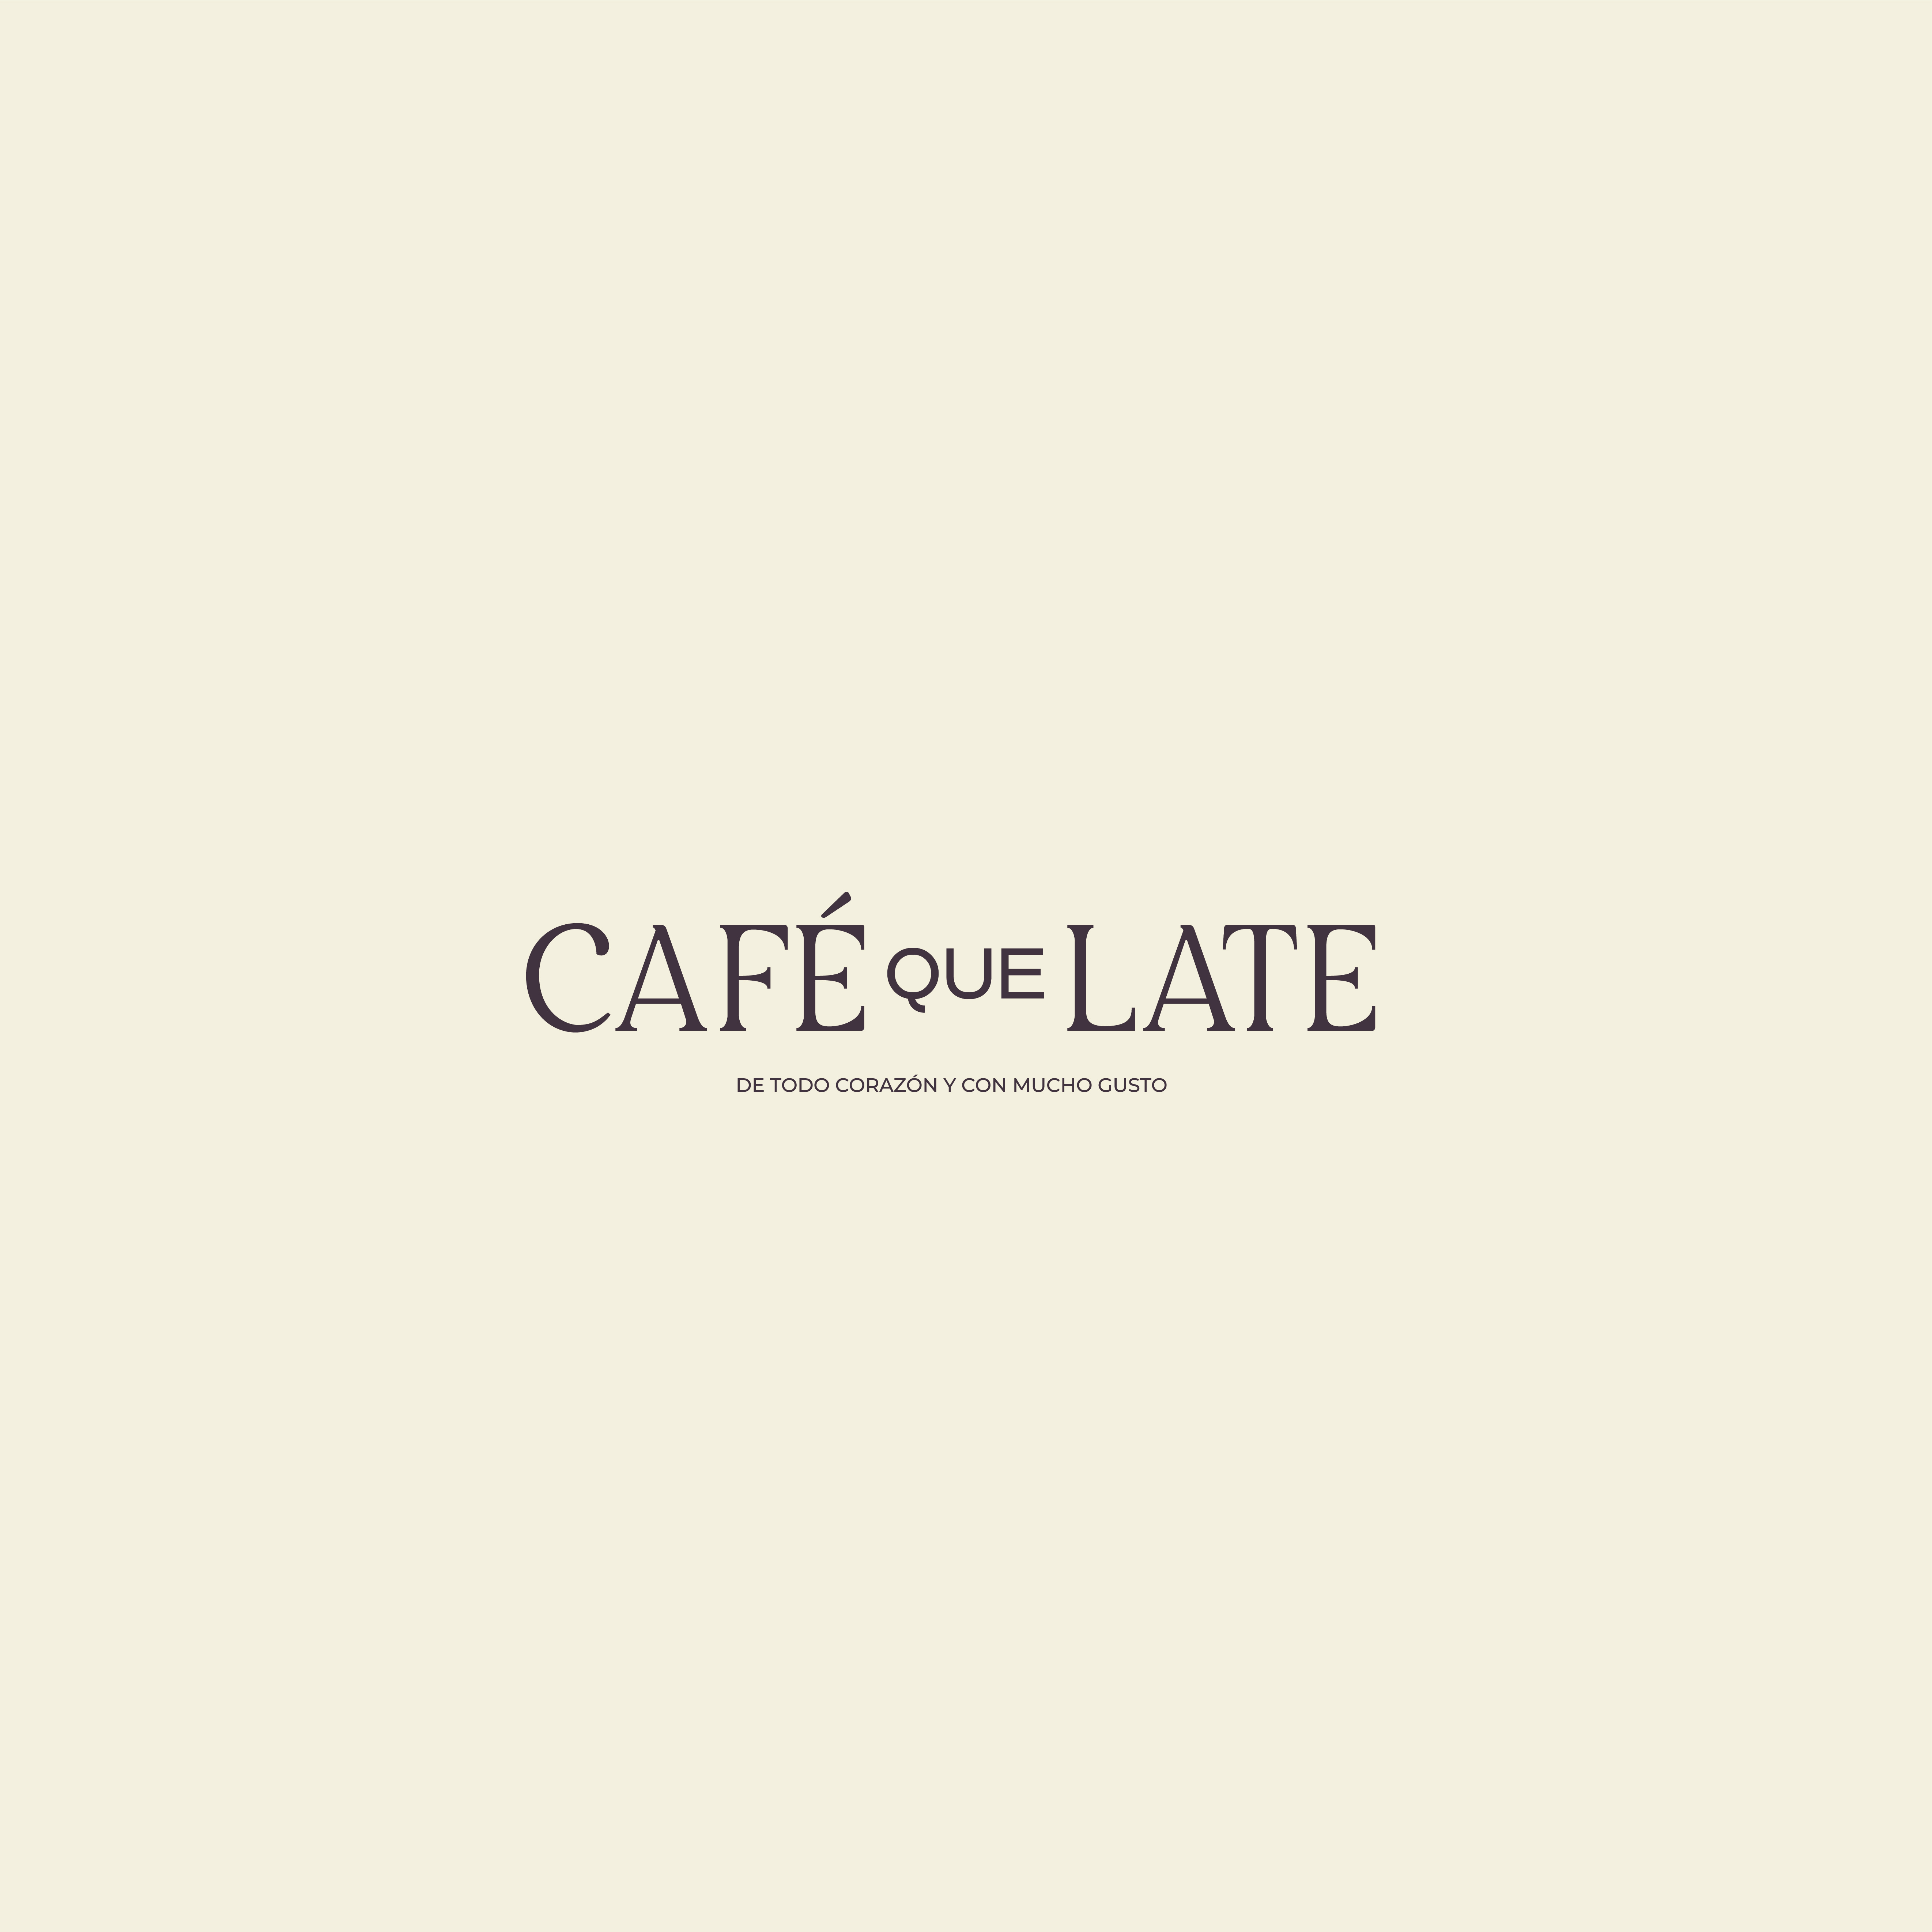 Concept Identity and Packaging Design for Café que Late by Ligero